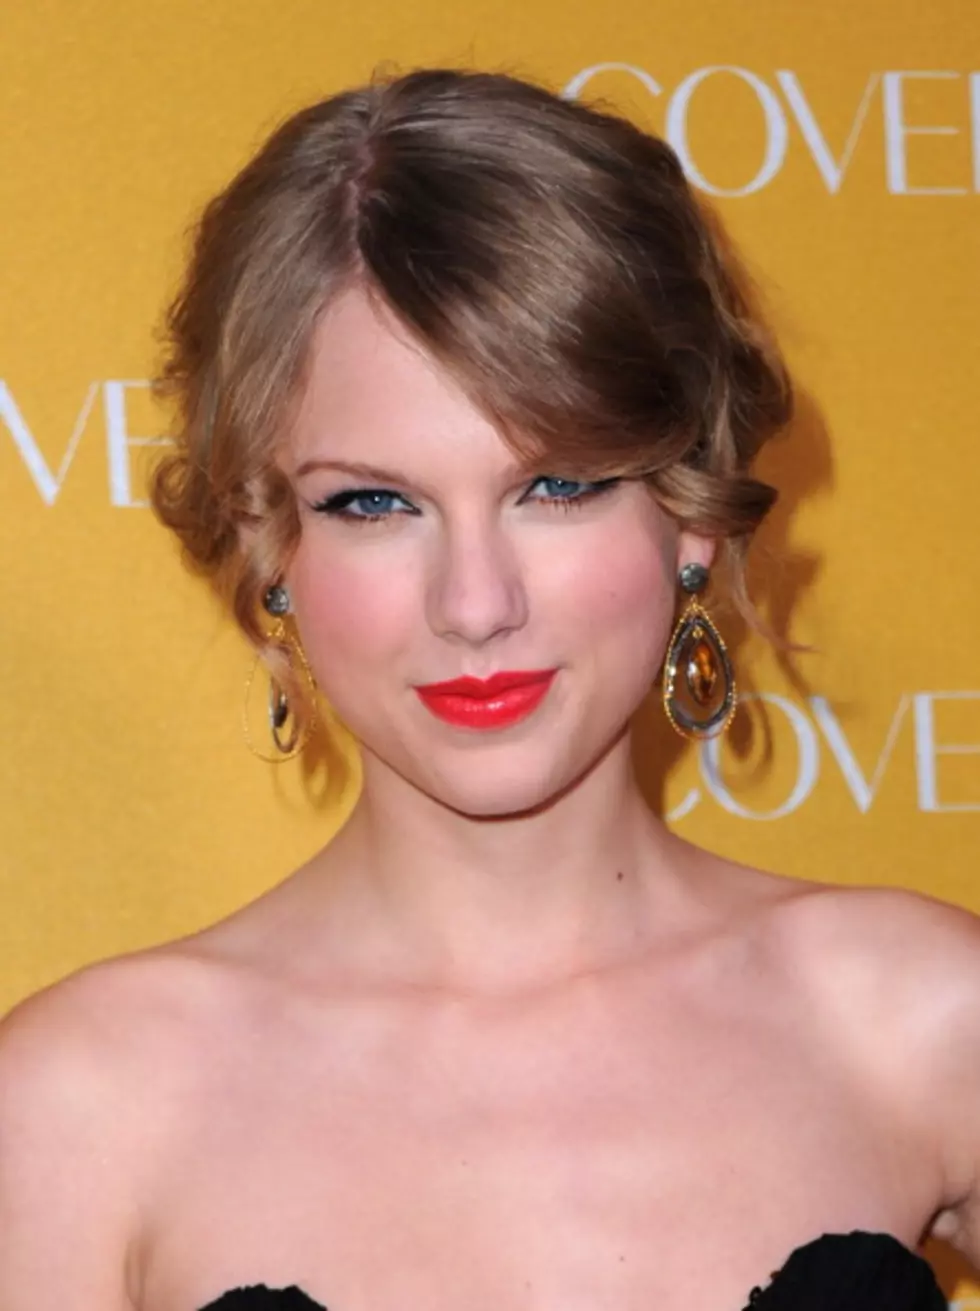 Country Star Taylor Swift Likes Classic Rock, Too!